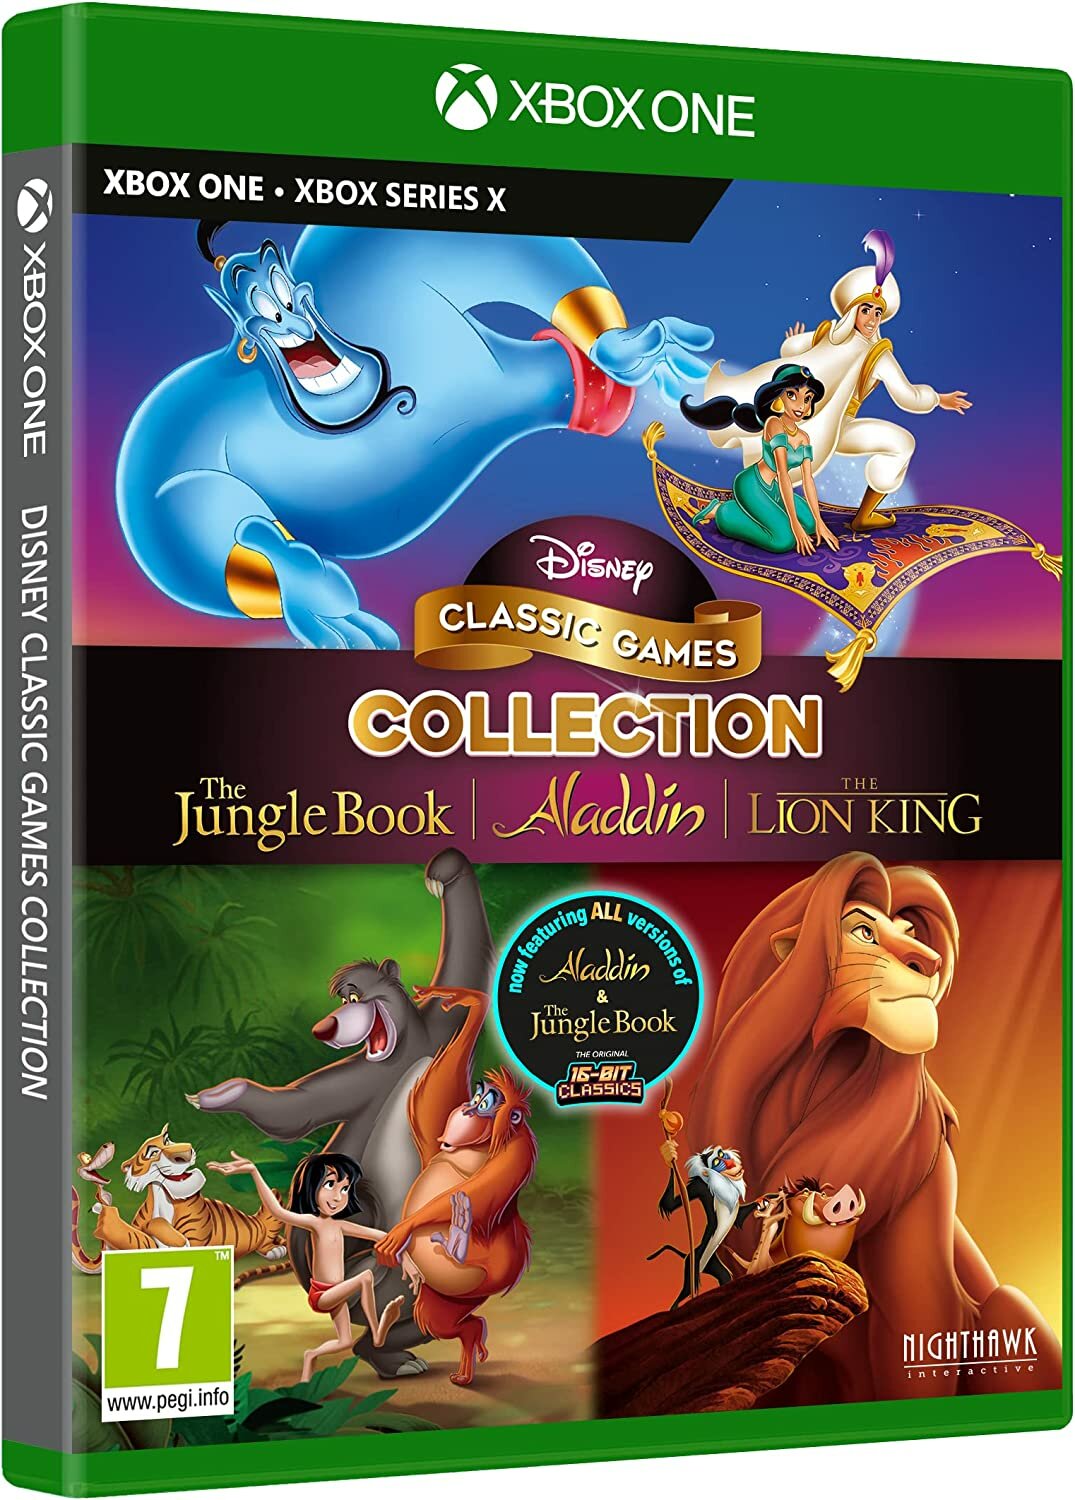 Disney Classic Games Collection: The Jungle Book Aladdin & The Lion King (Xbox One / Series)